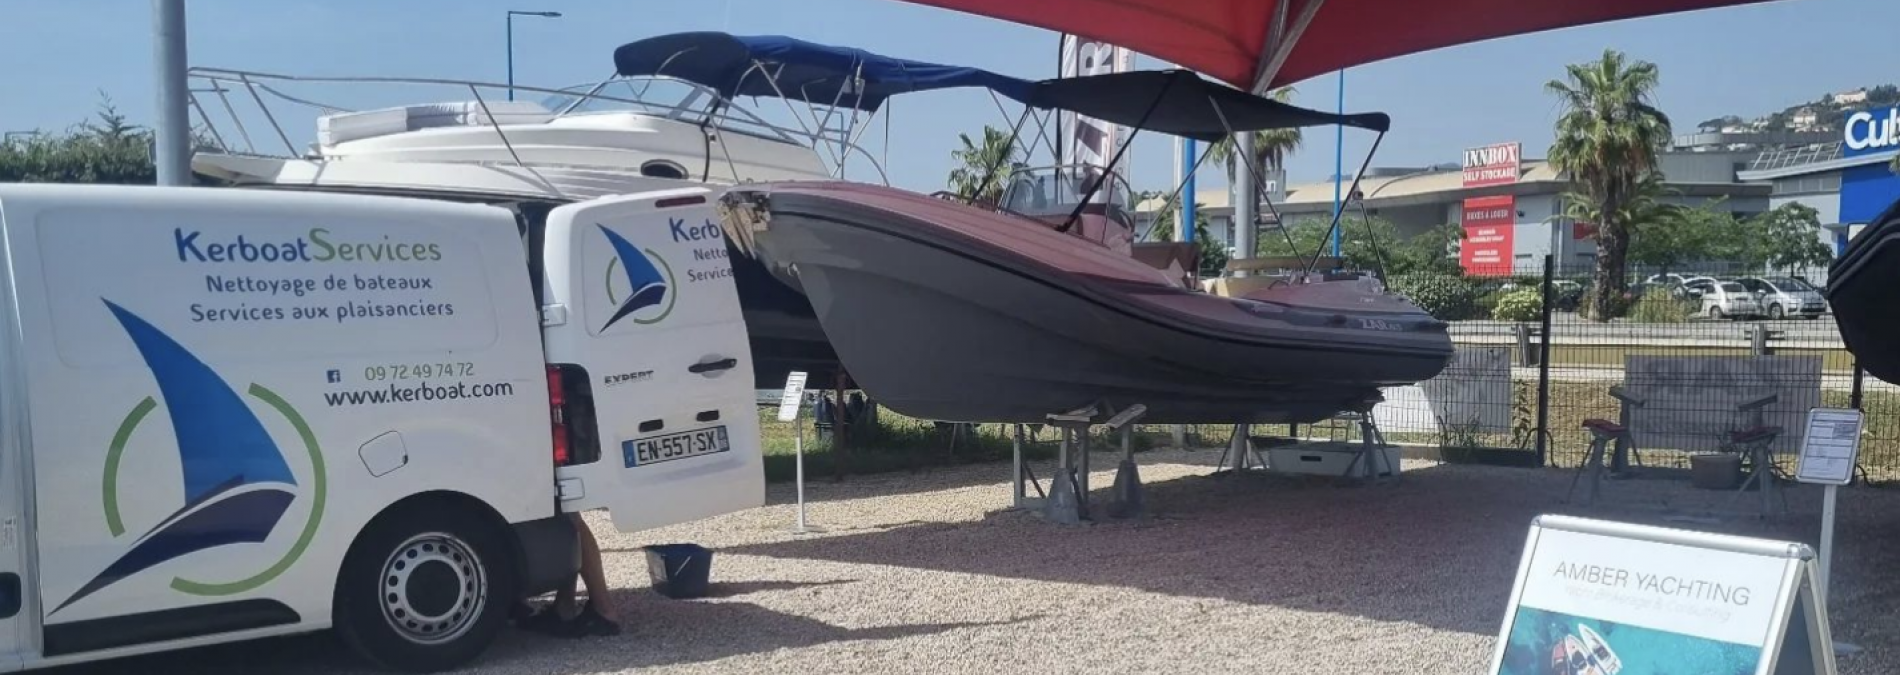 Amber Yachting boat consignment service in Mandelieu 